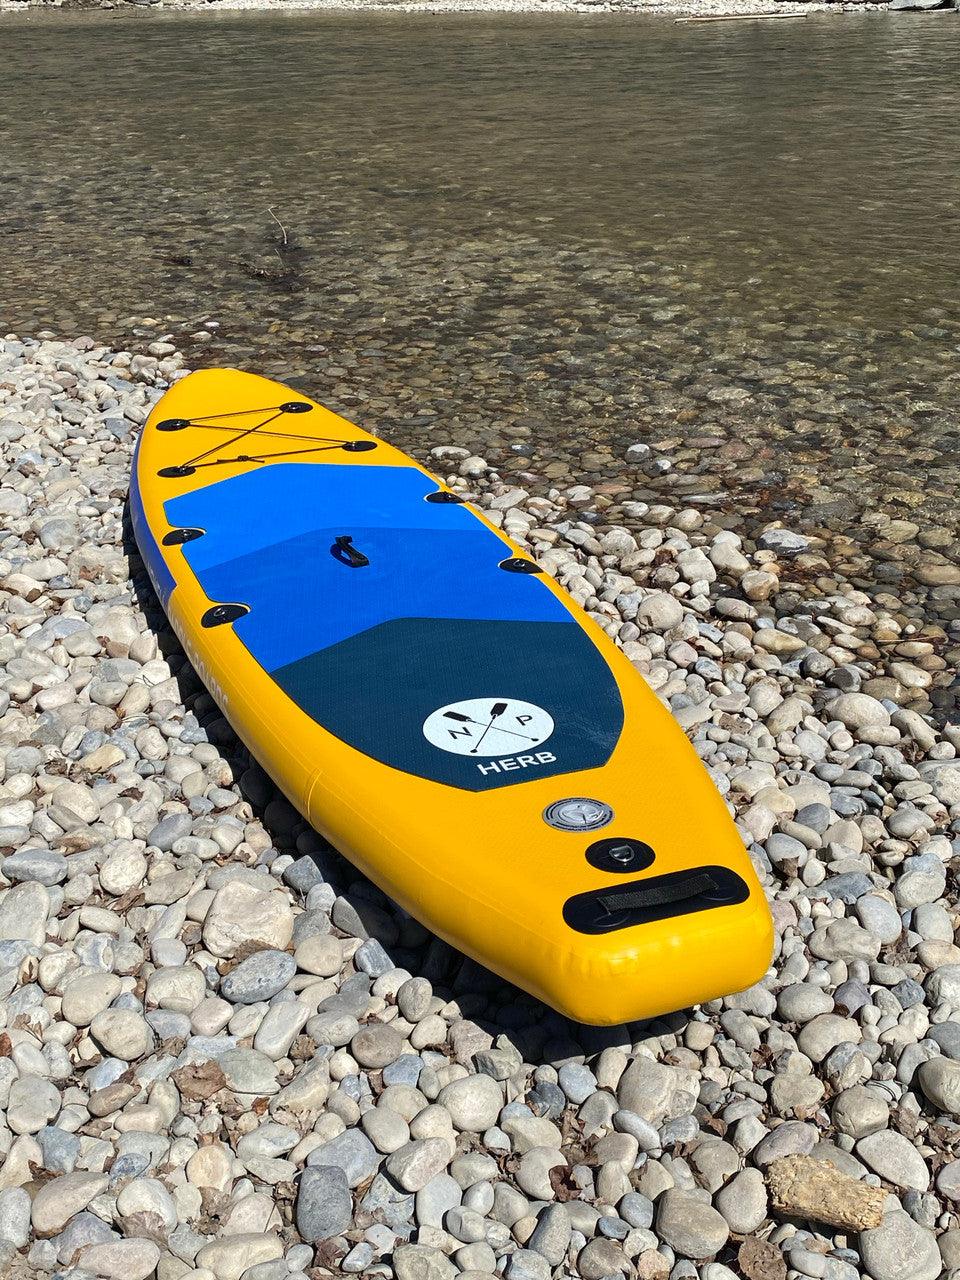 The Herb paddleboard by Newell Outdoors.